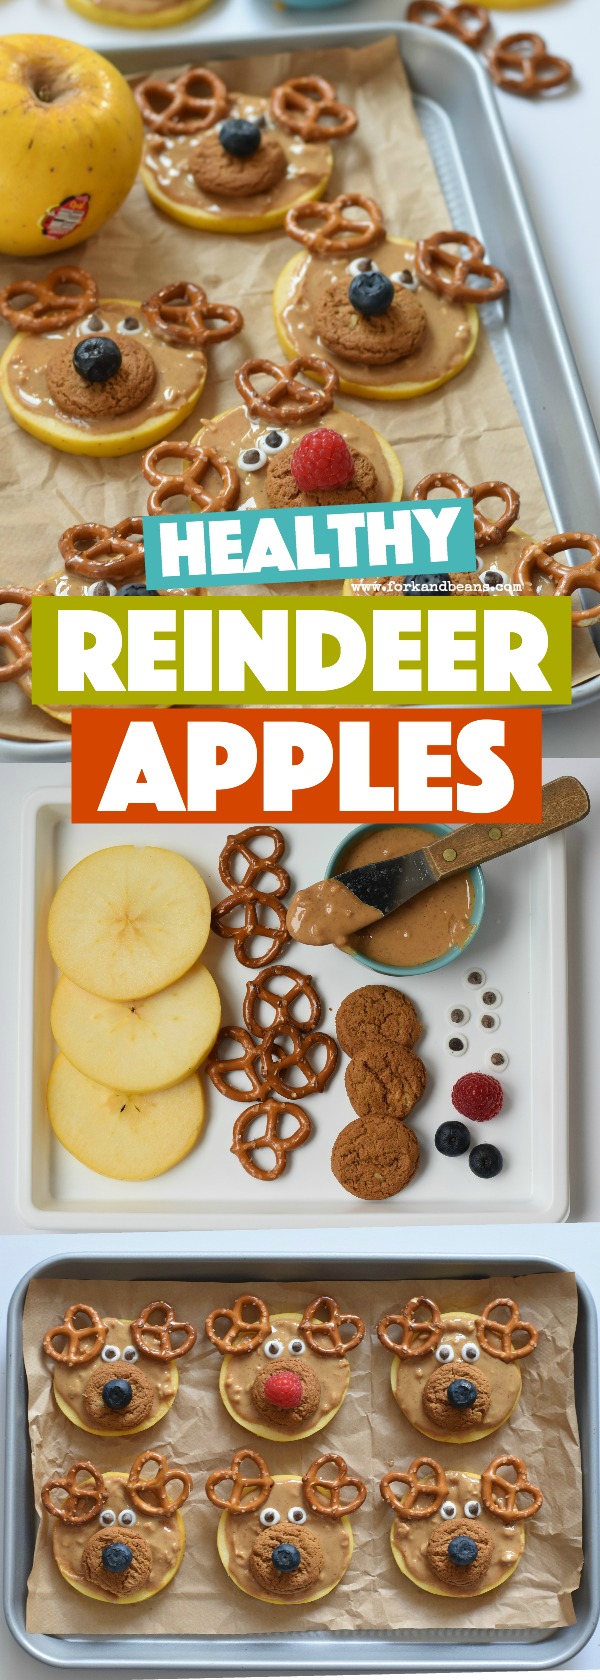 Sliced Opal apples covered with peanut butter and pretzel antlers, these Reindeer Apple Slices are a snack that every kid will love this Christmas #christmasfunfood #funkidfood